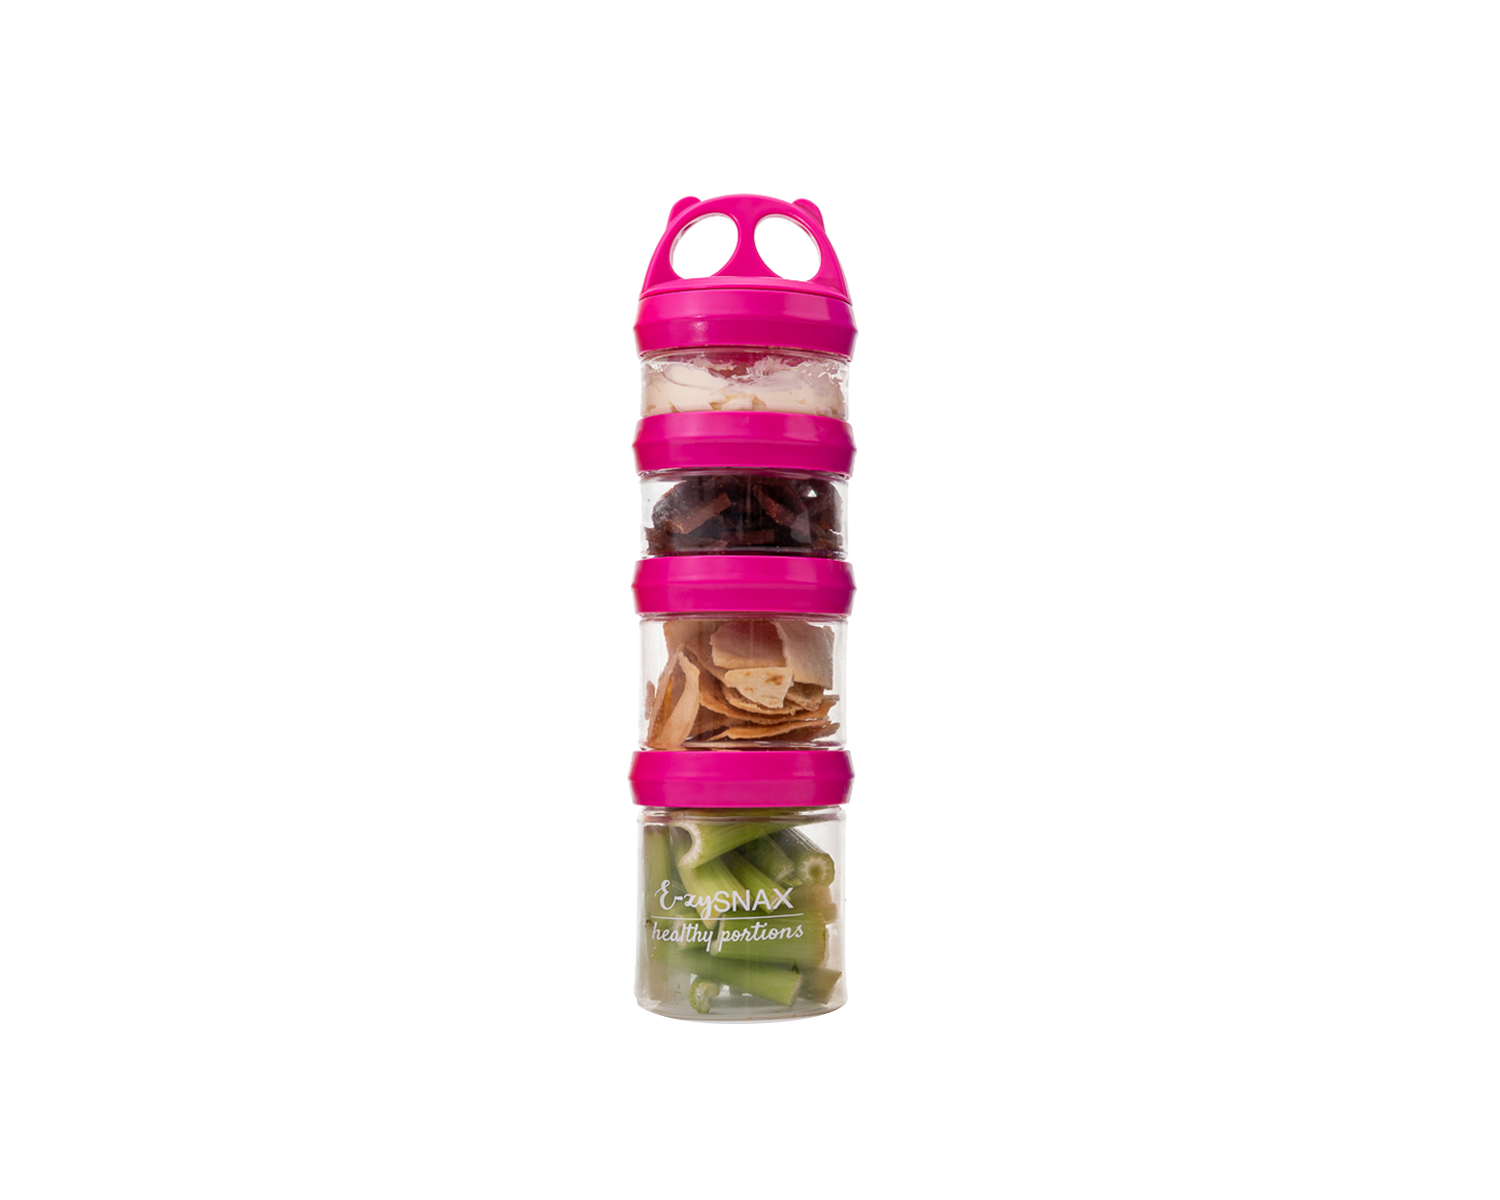 BlenderBottle Food Storage Snack Containers